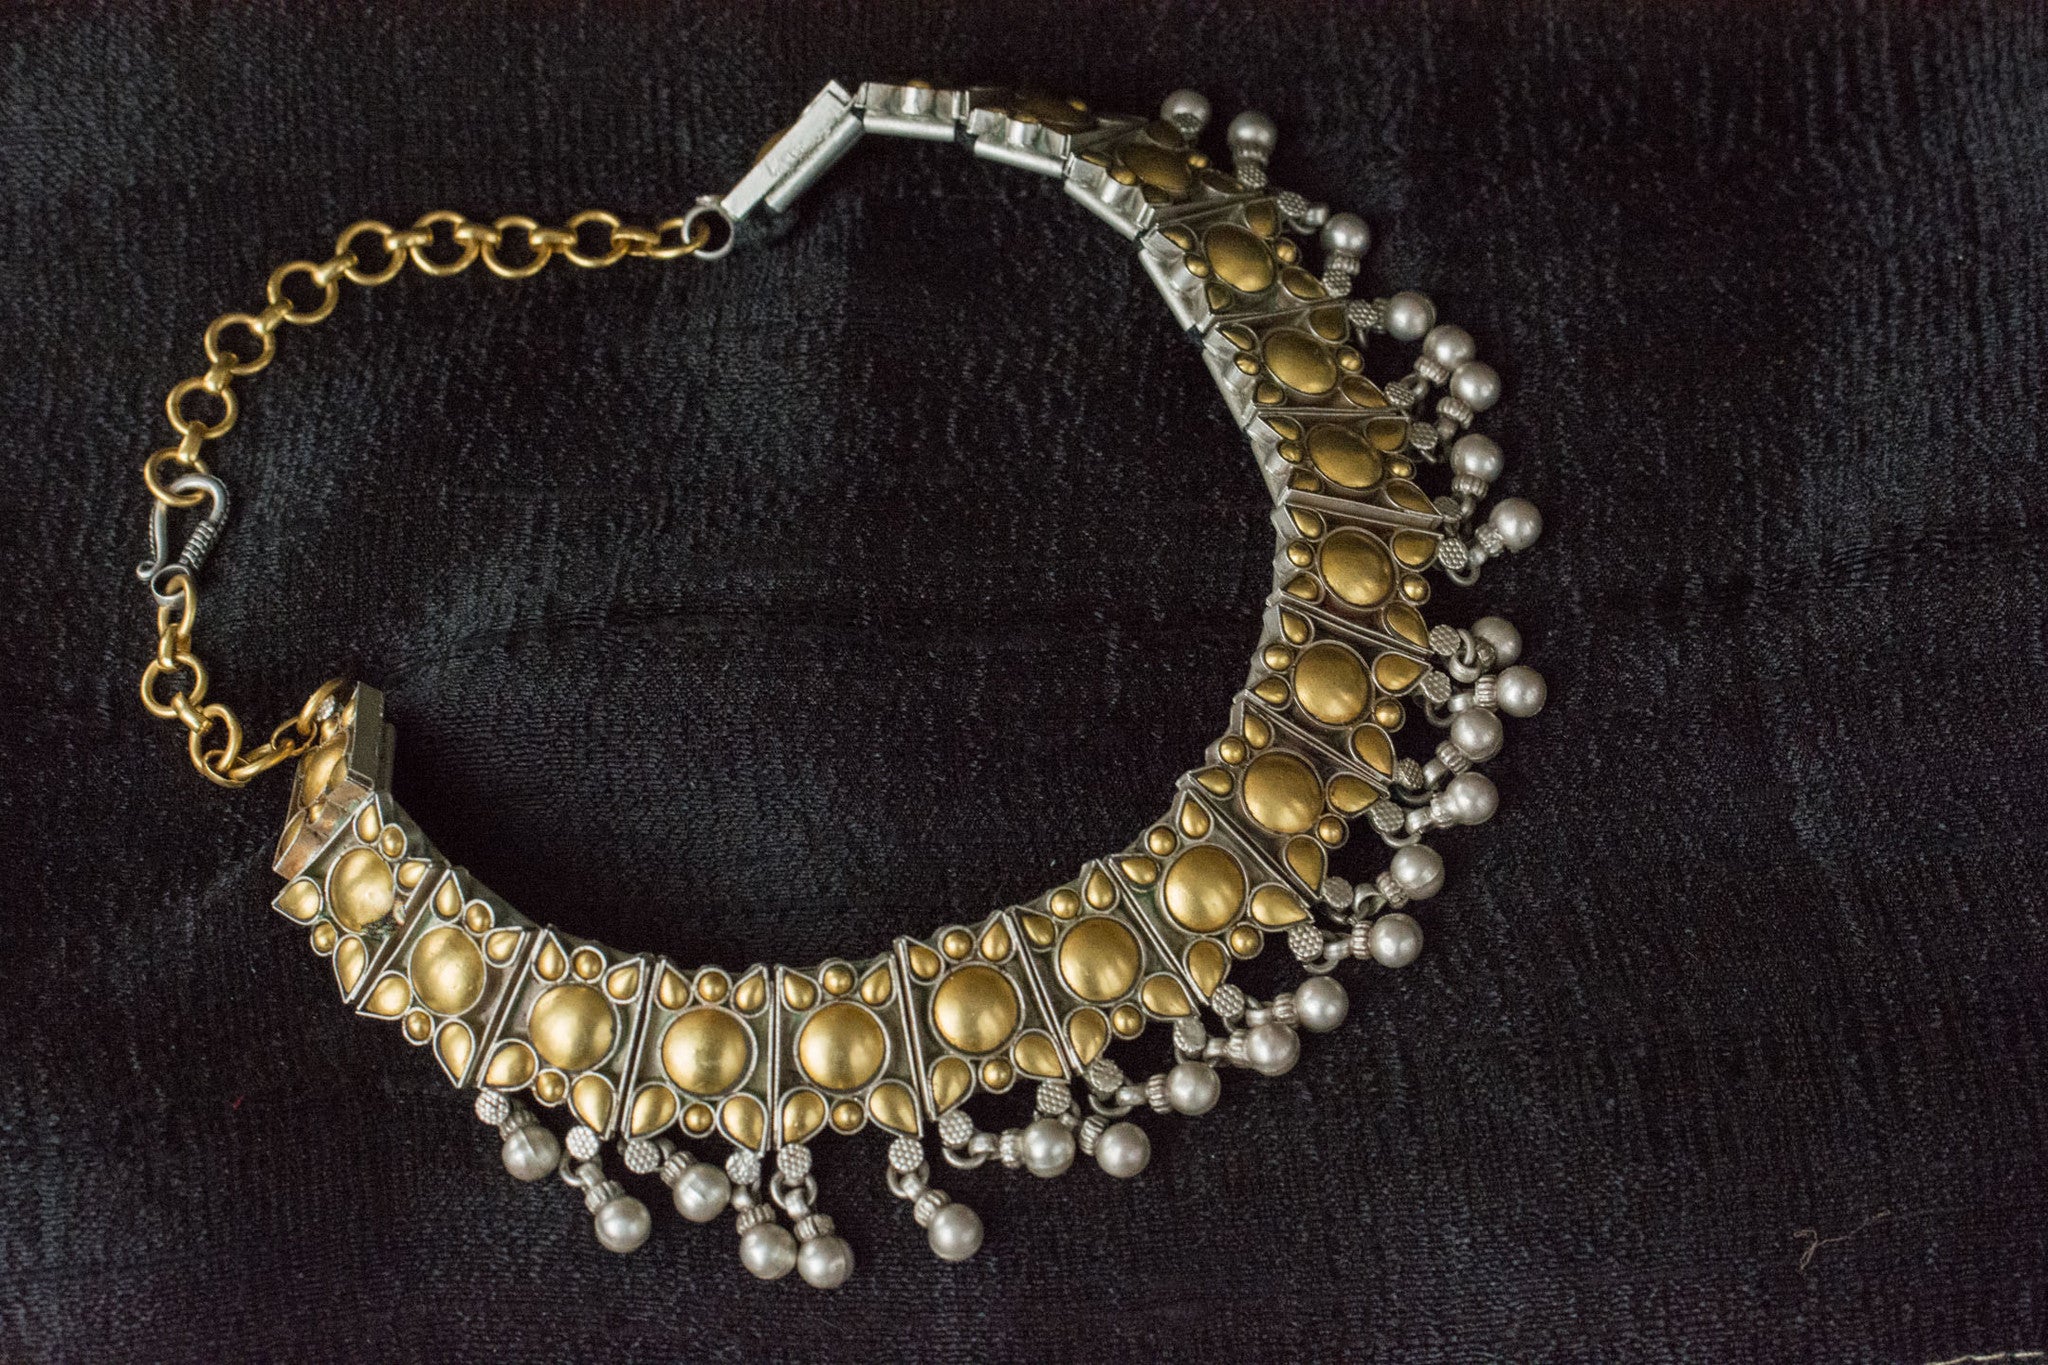 Indian Silver gold plated Amrapali Beaded fashion necklace. Traditional look neckpiece good in all events.-full view